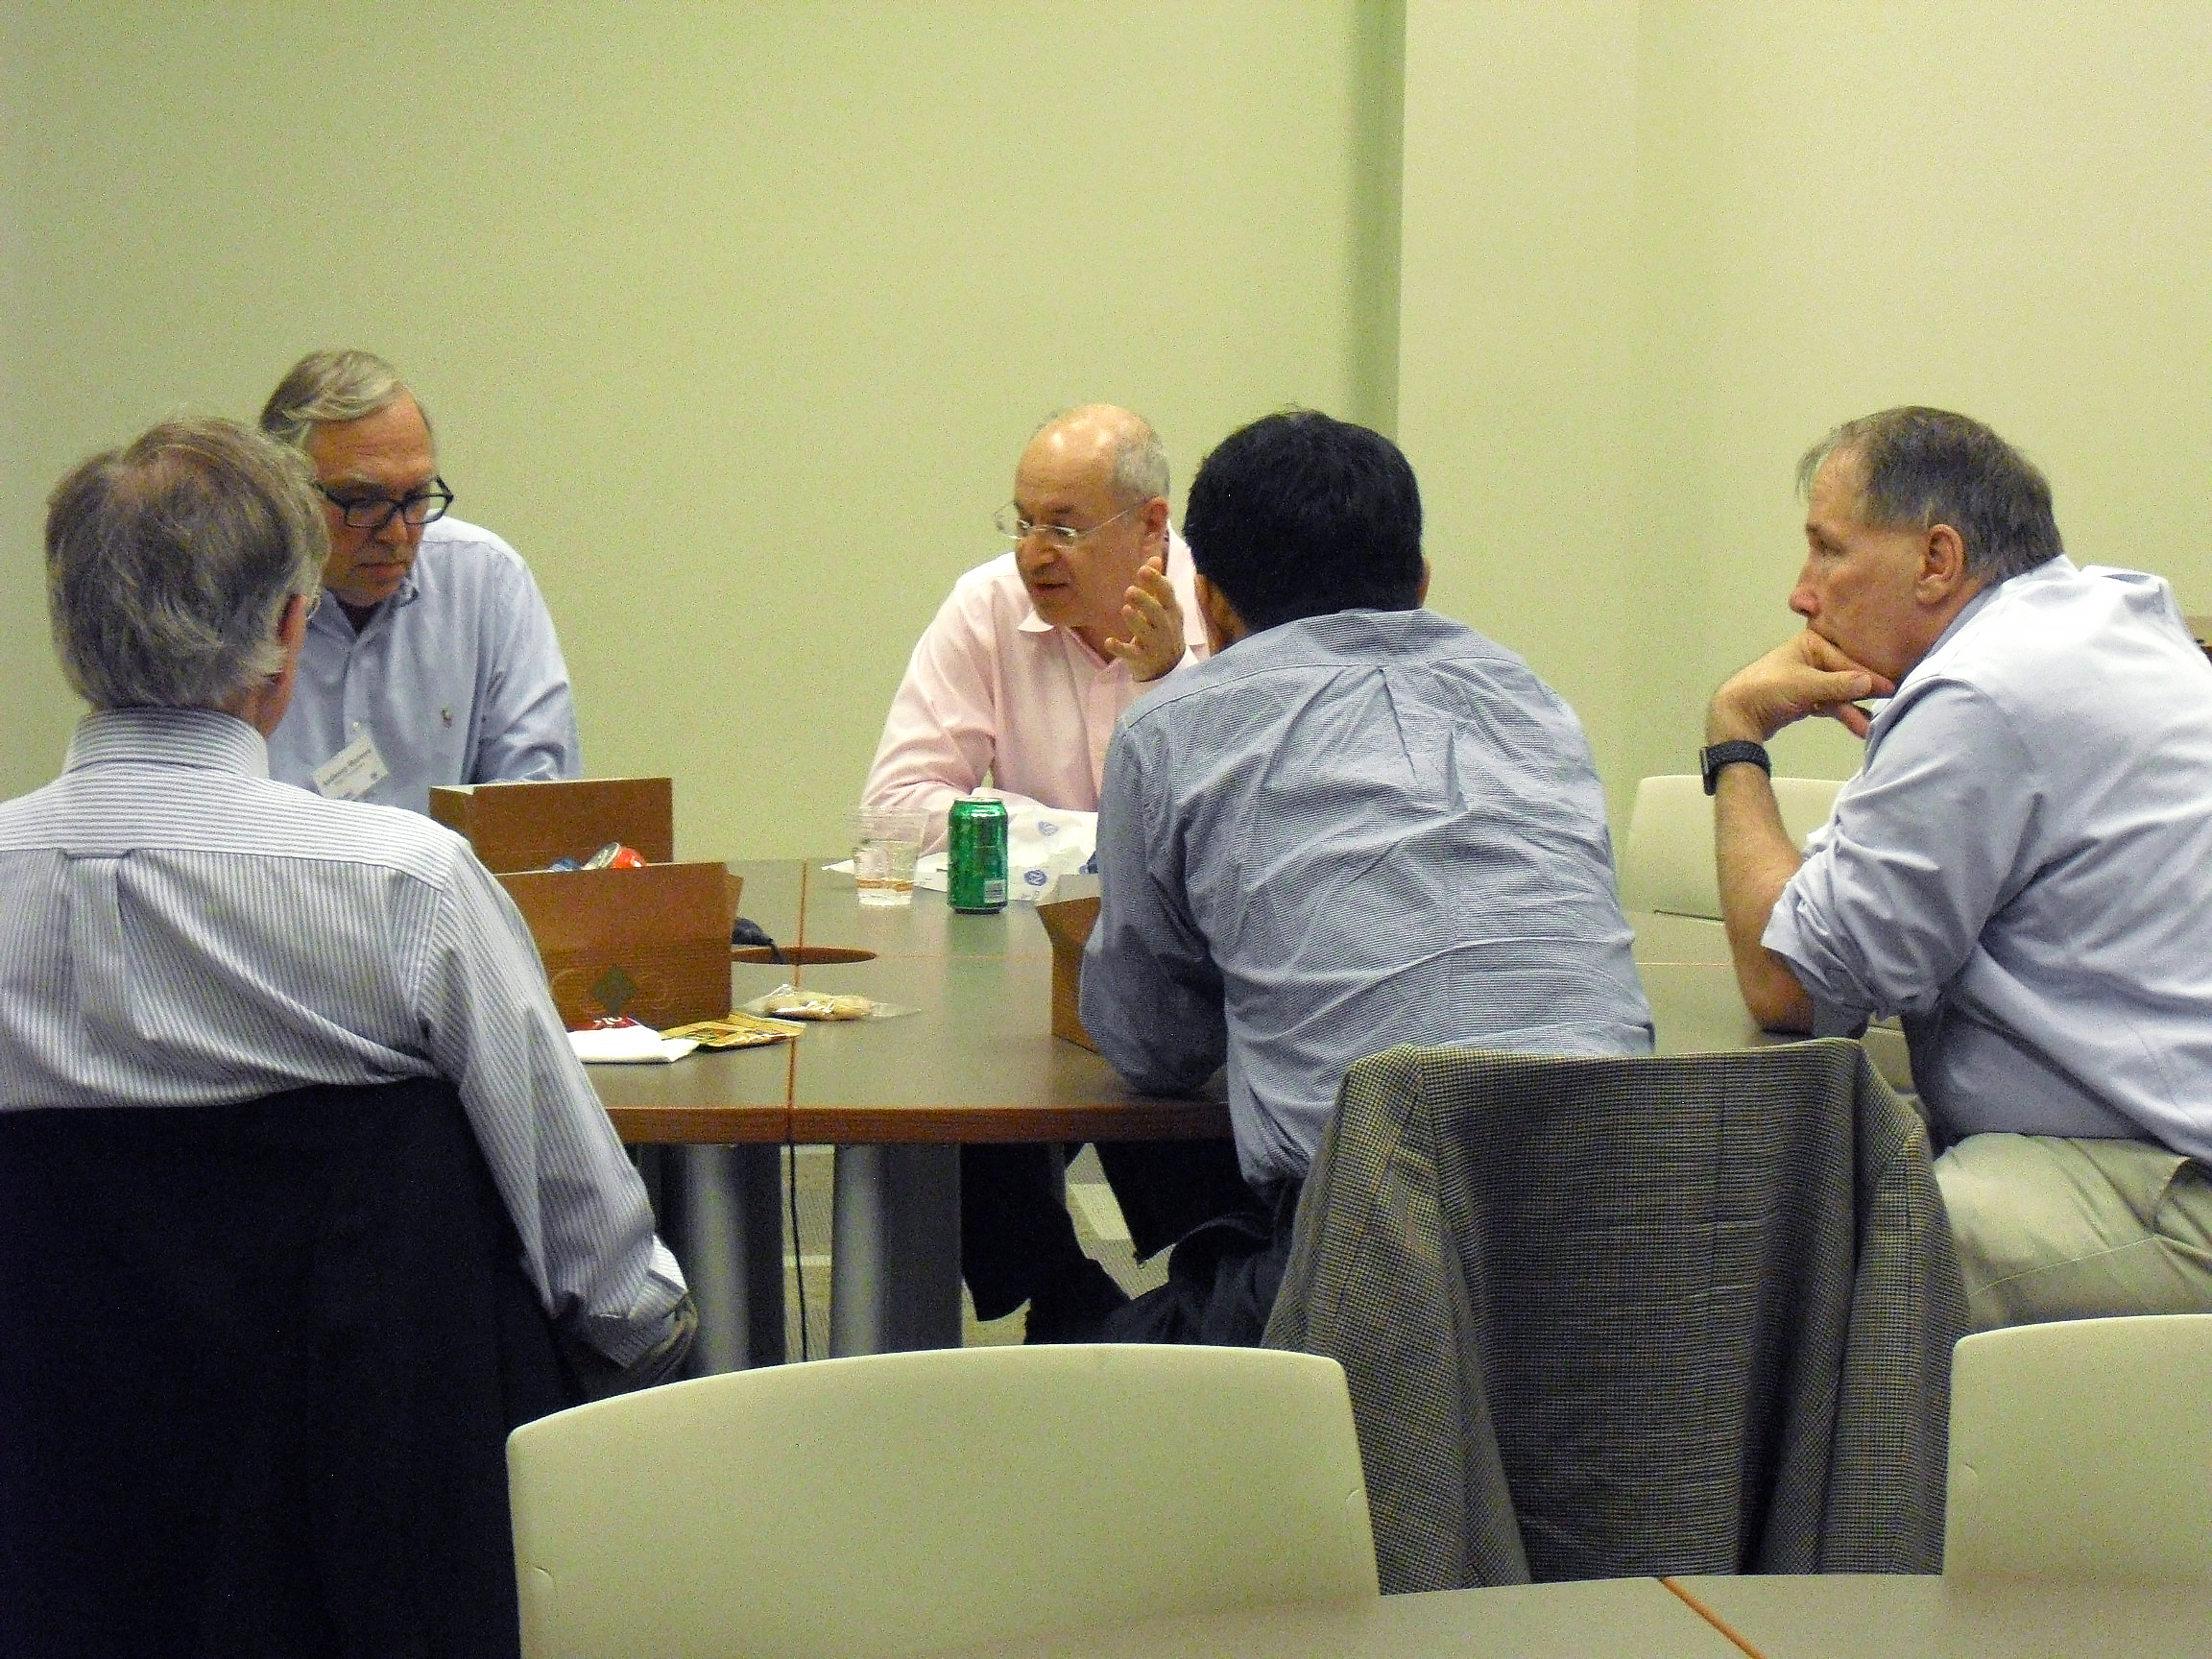 Five individuals seated around a table engaged in conversation, including Dr. Soper.